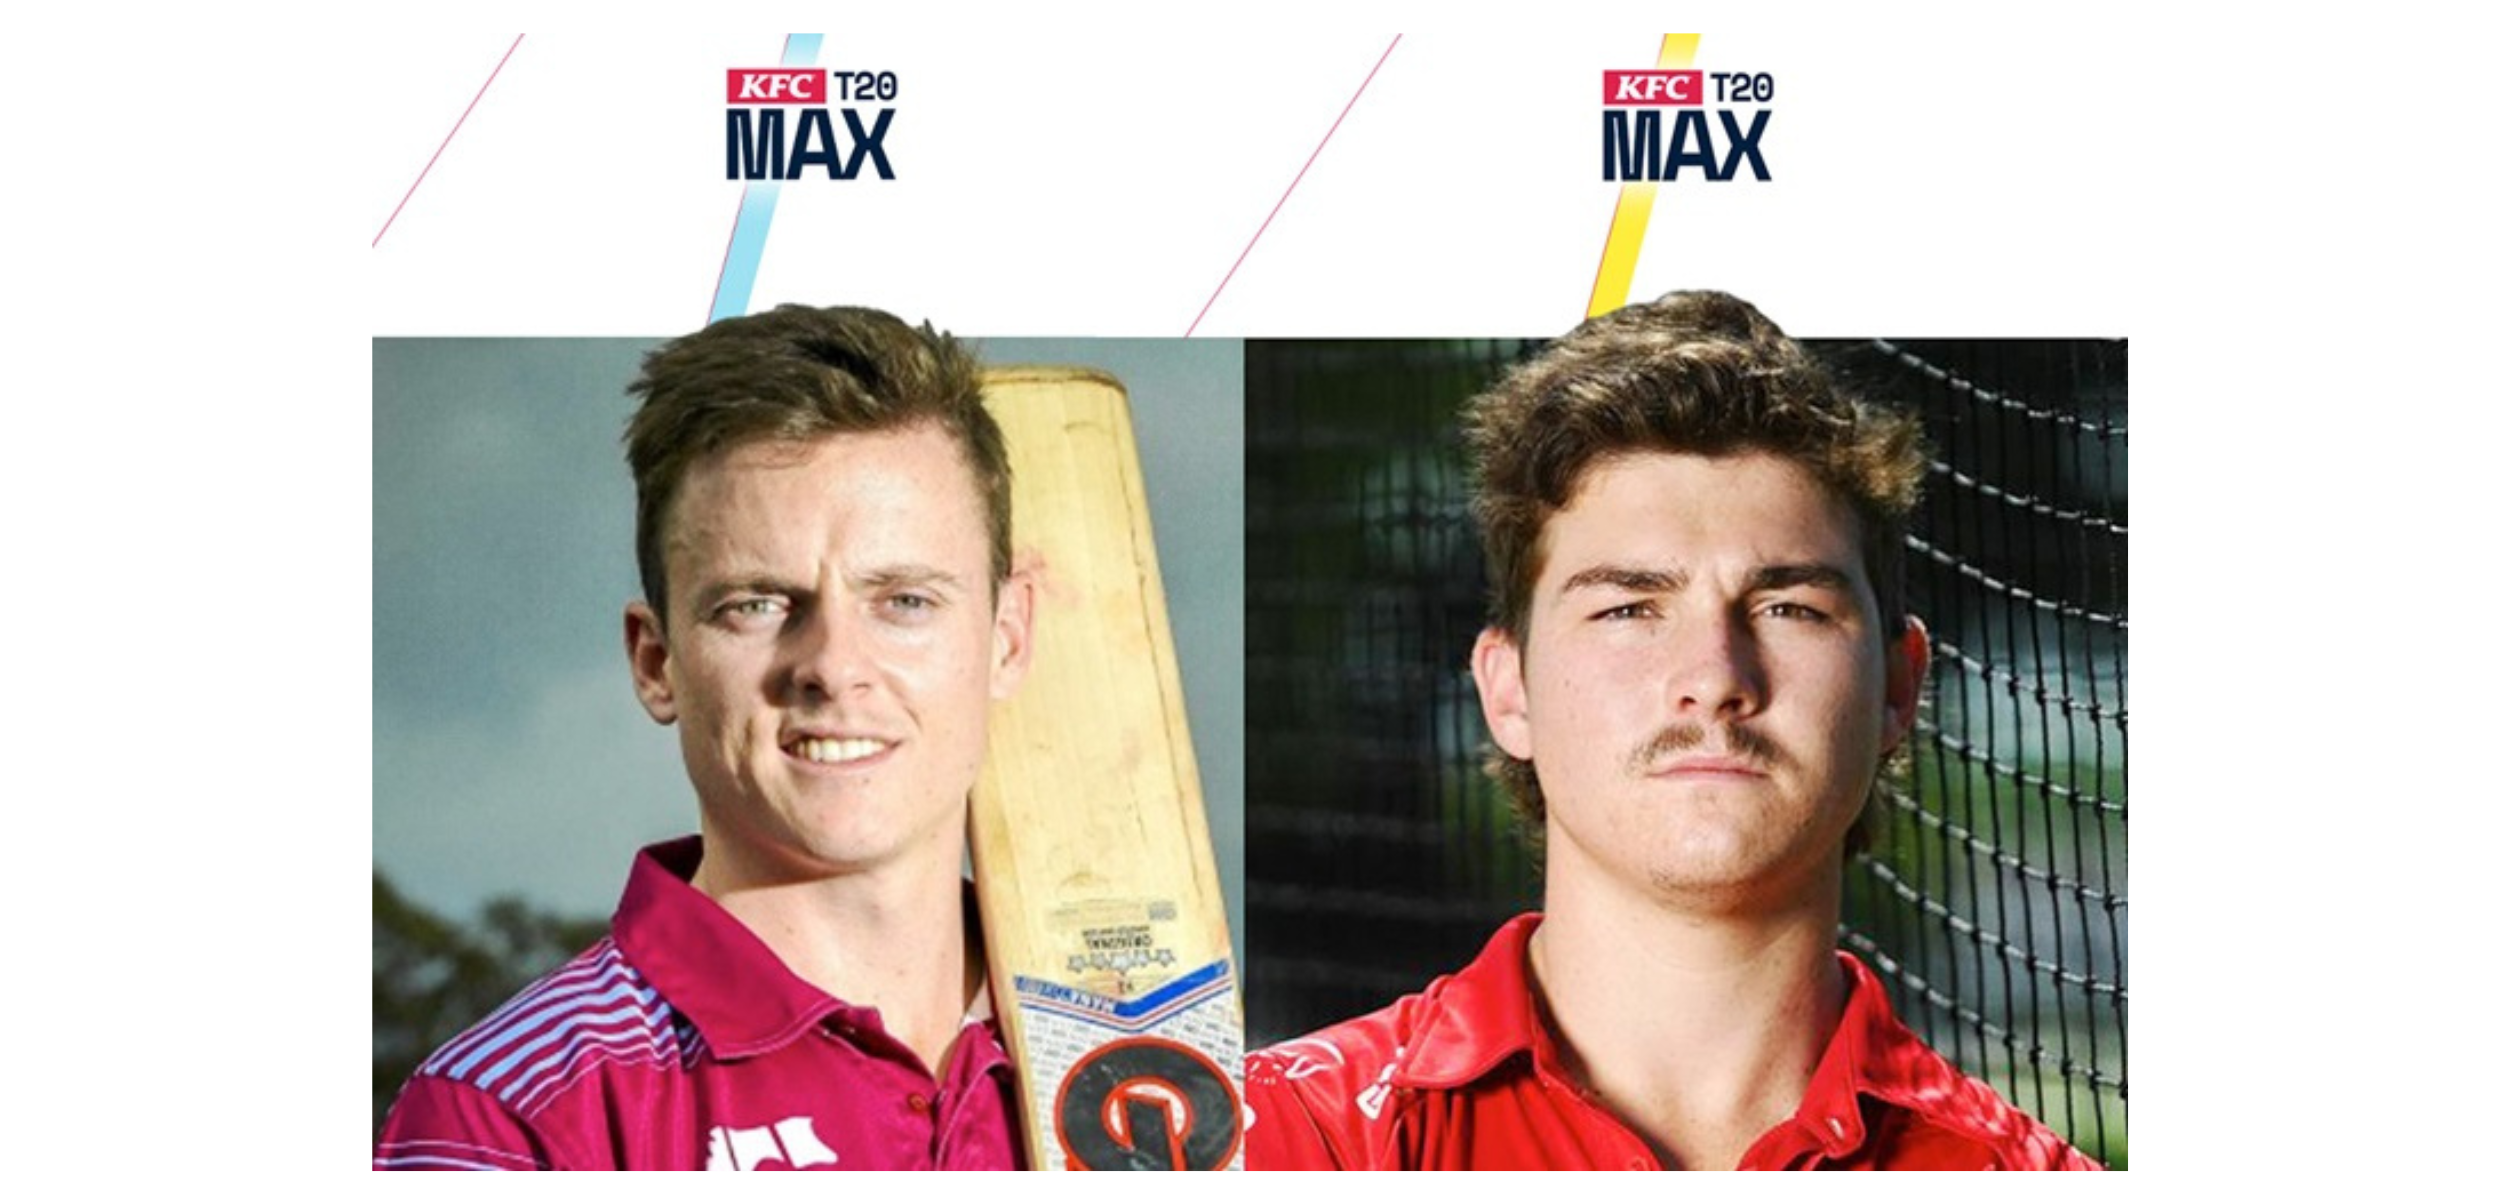 Queensland Cricket: KFC T20 Max Boost For Country